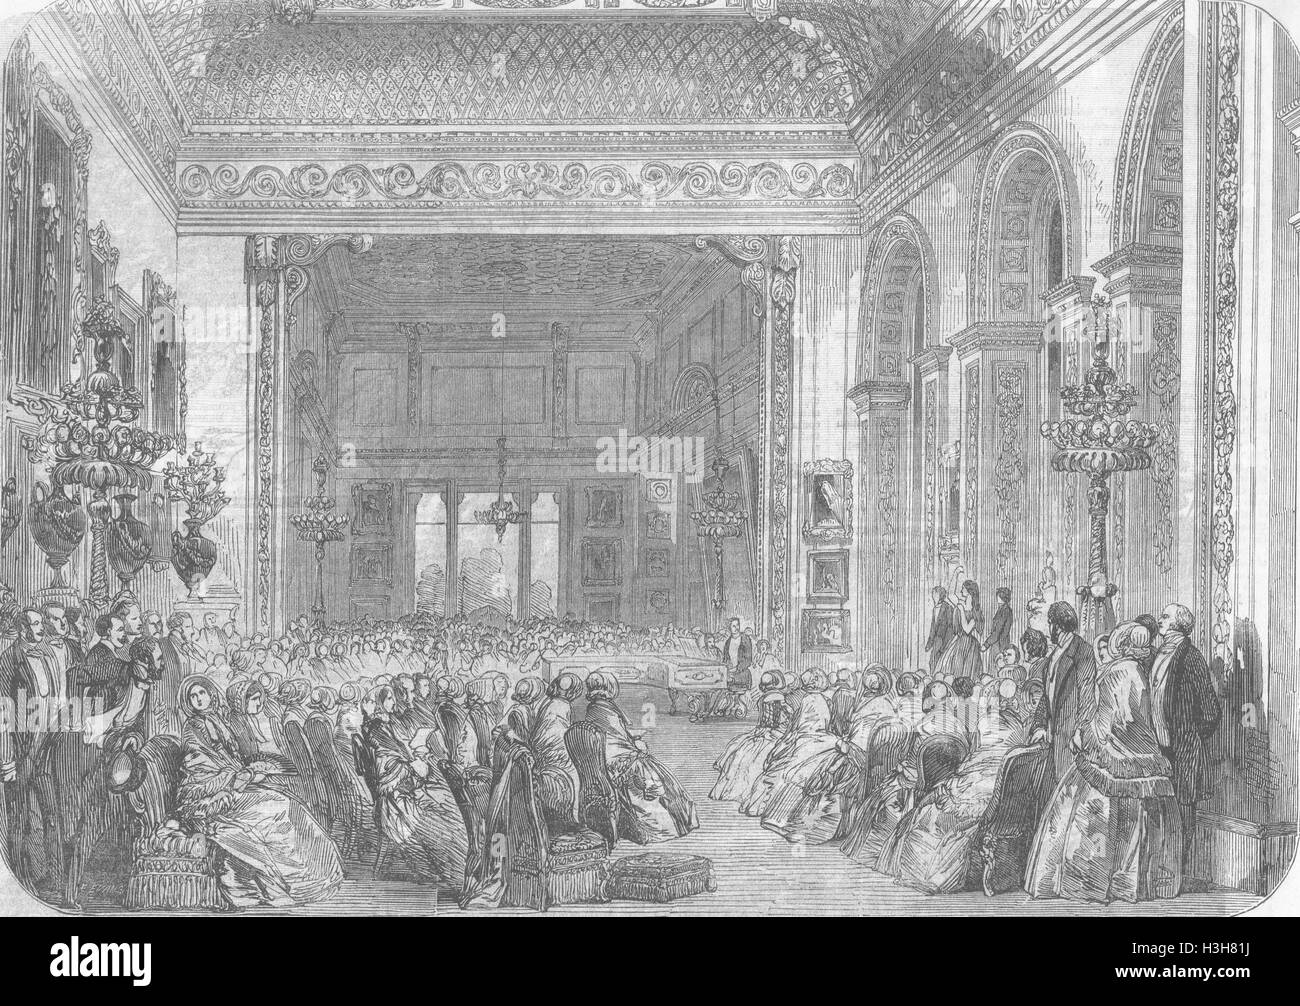 STAFFS Matinee musicale, Stafford House 1851. Illustrated London News Stock Photo